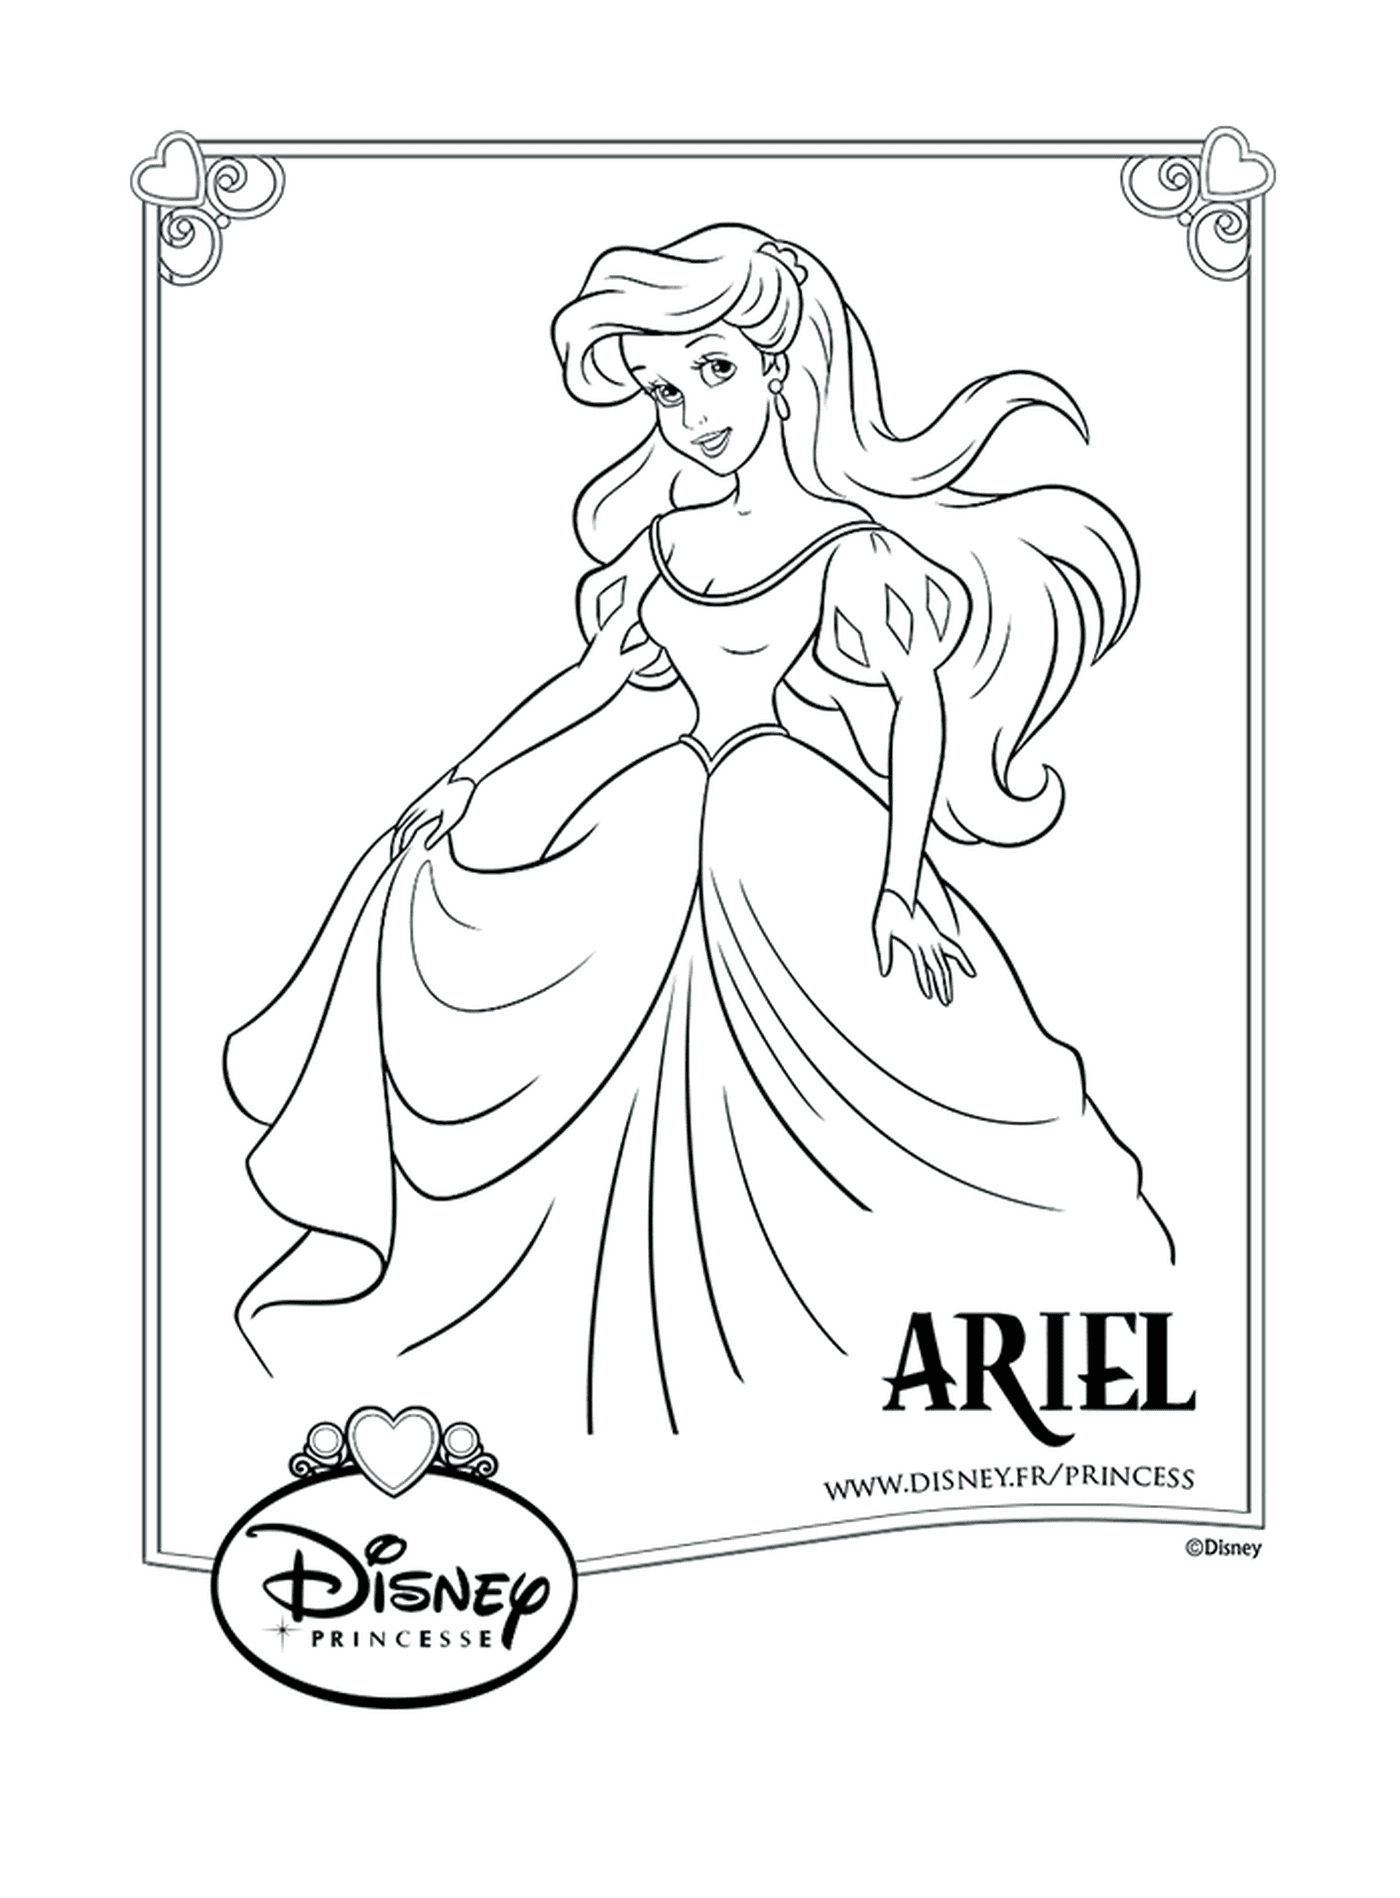  Ariel, a long-haired girl 